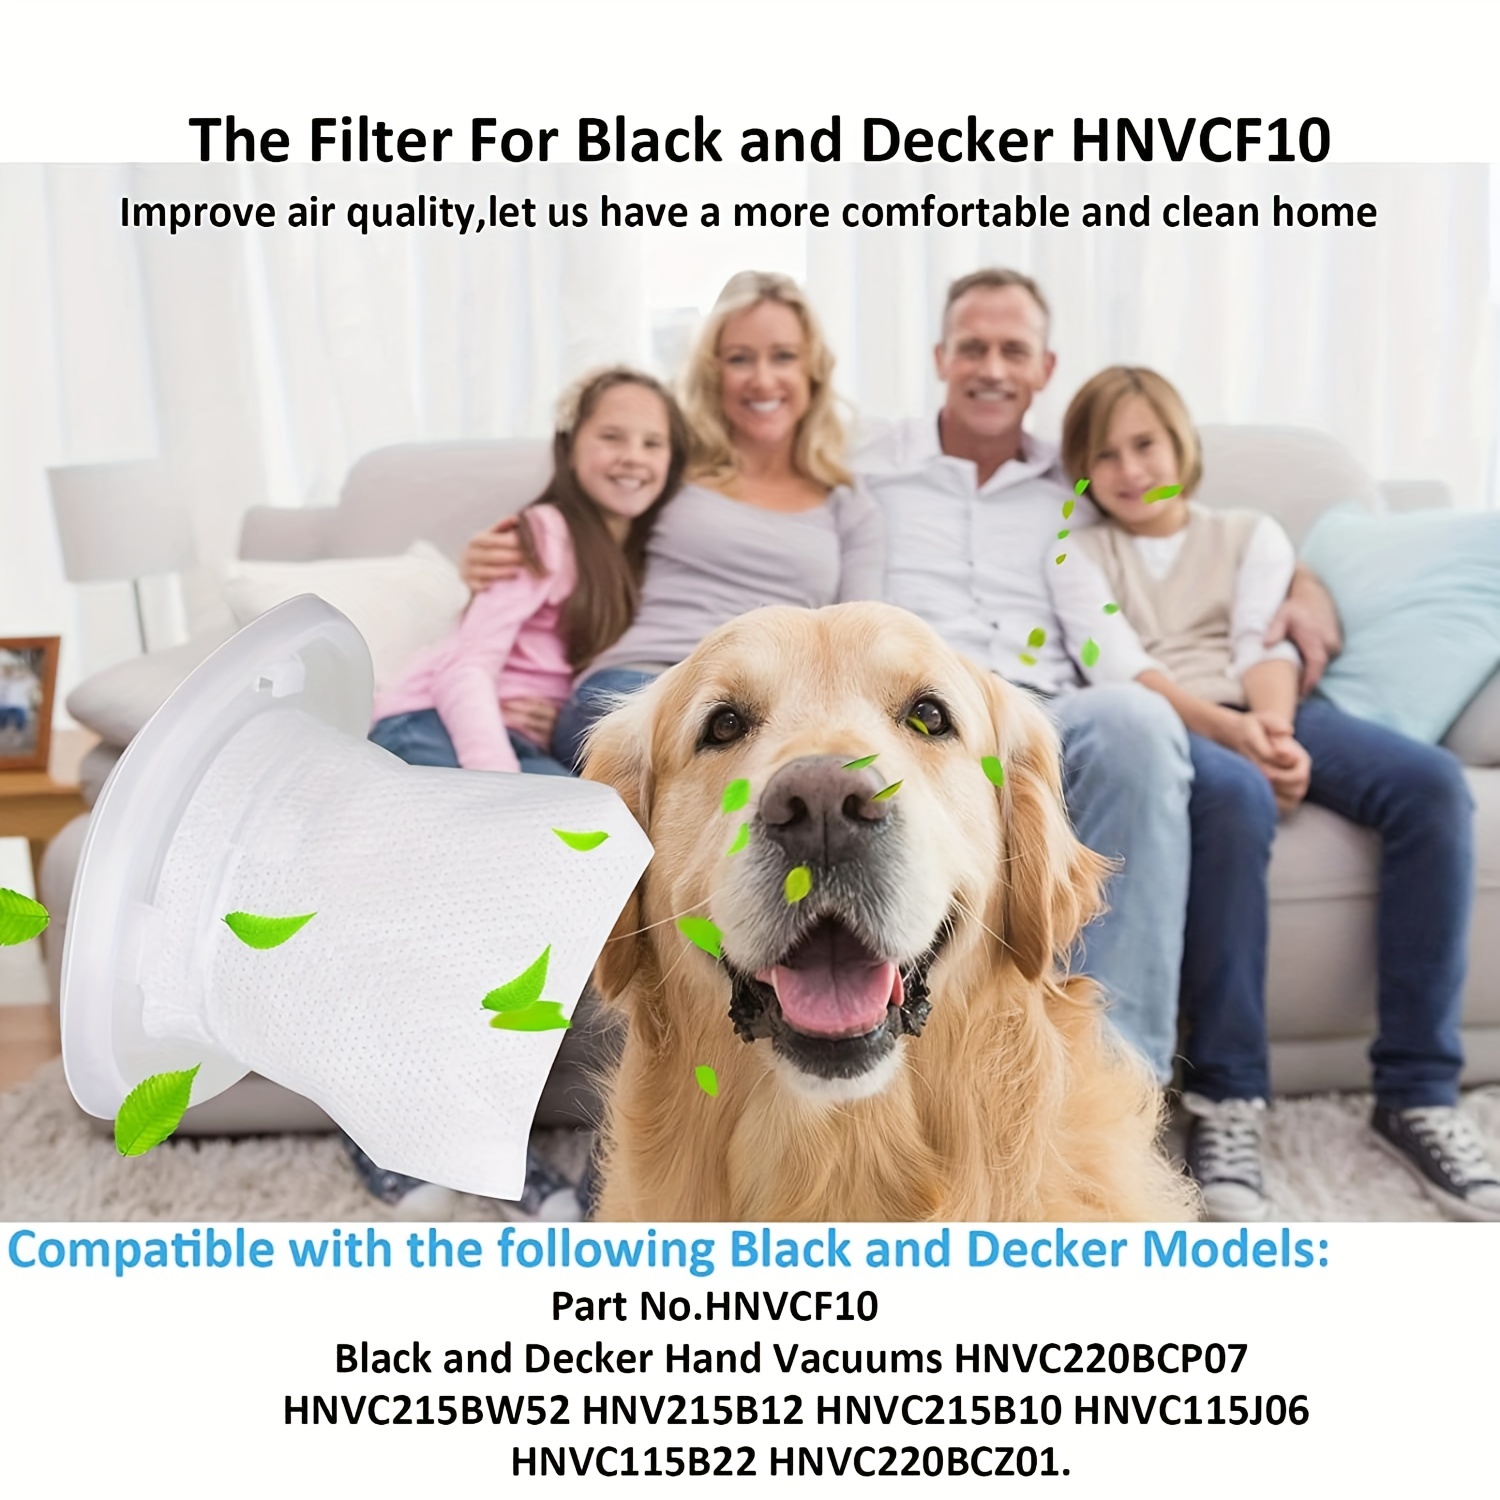 HNVCF10 Filters for Black and Decker HNVC215B10 & Other Compatible